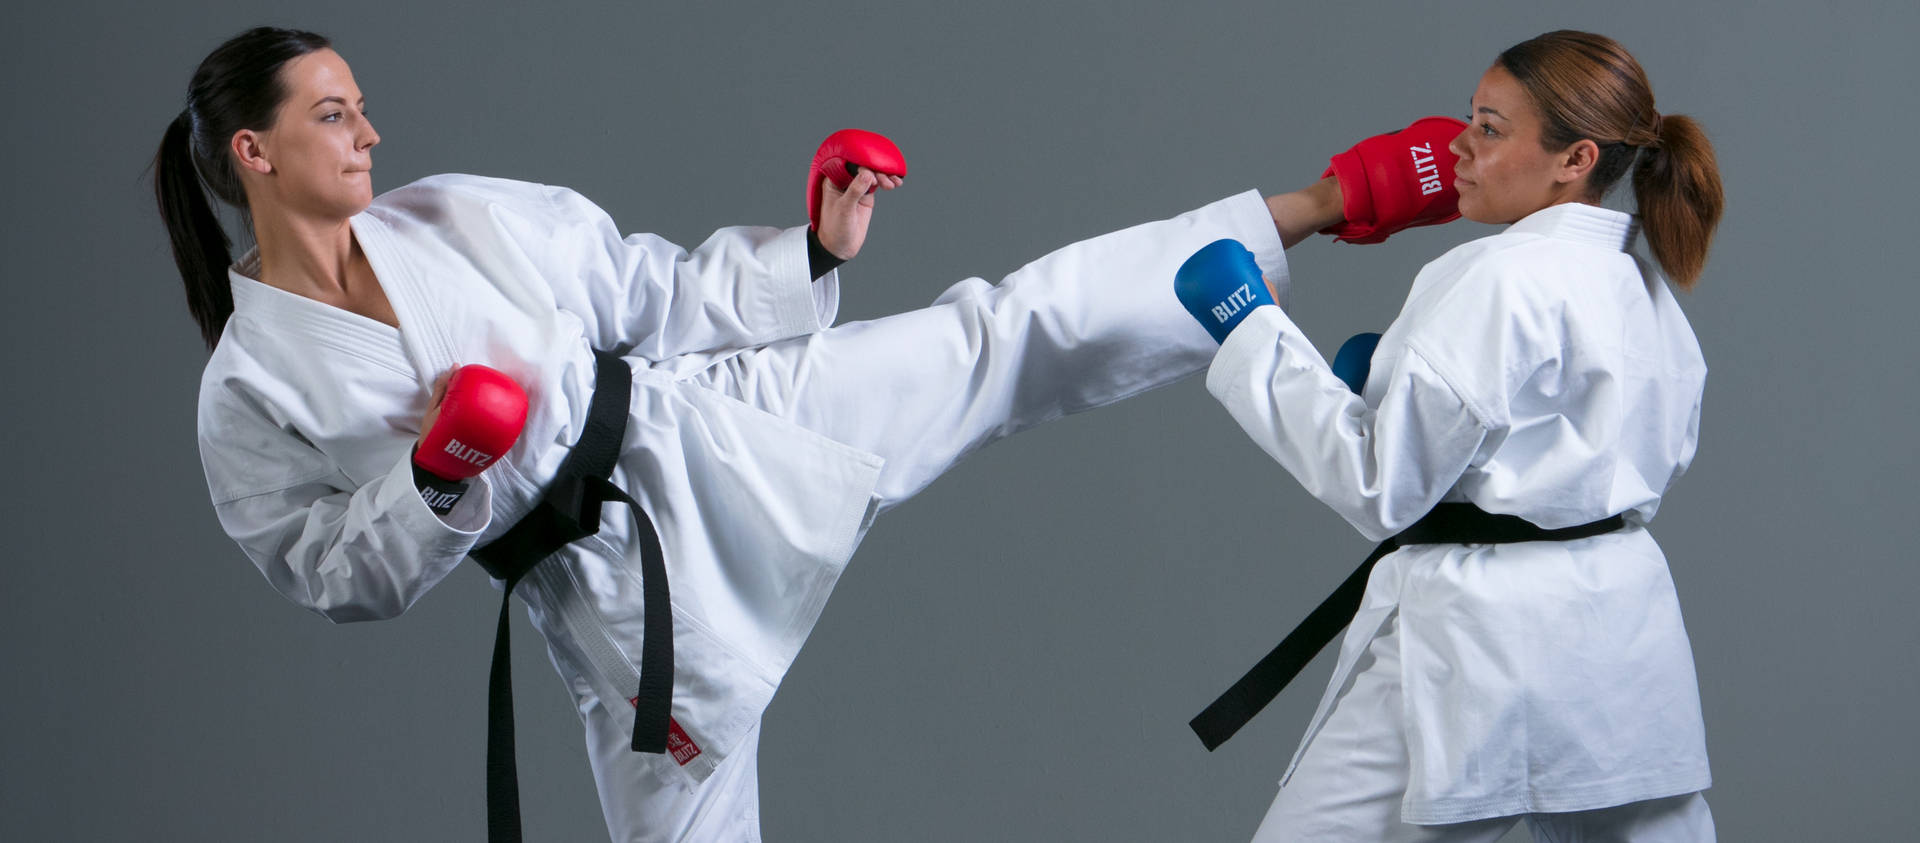 Caption: Dynamic Karate Action Between Two Female Martial Artists Wallpaper